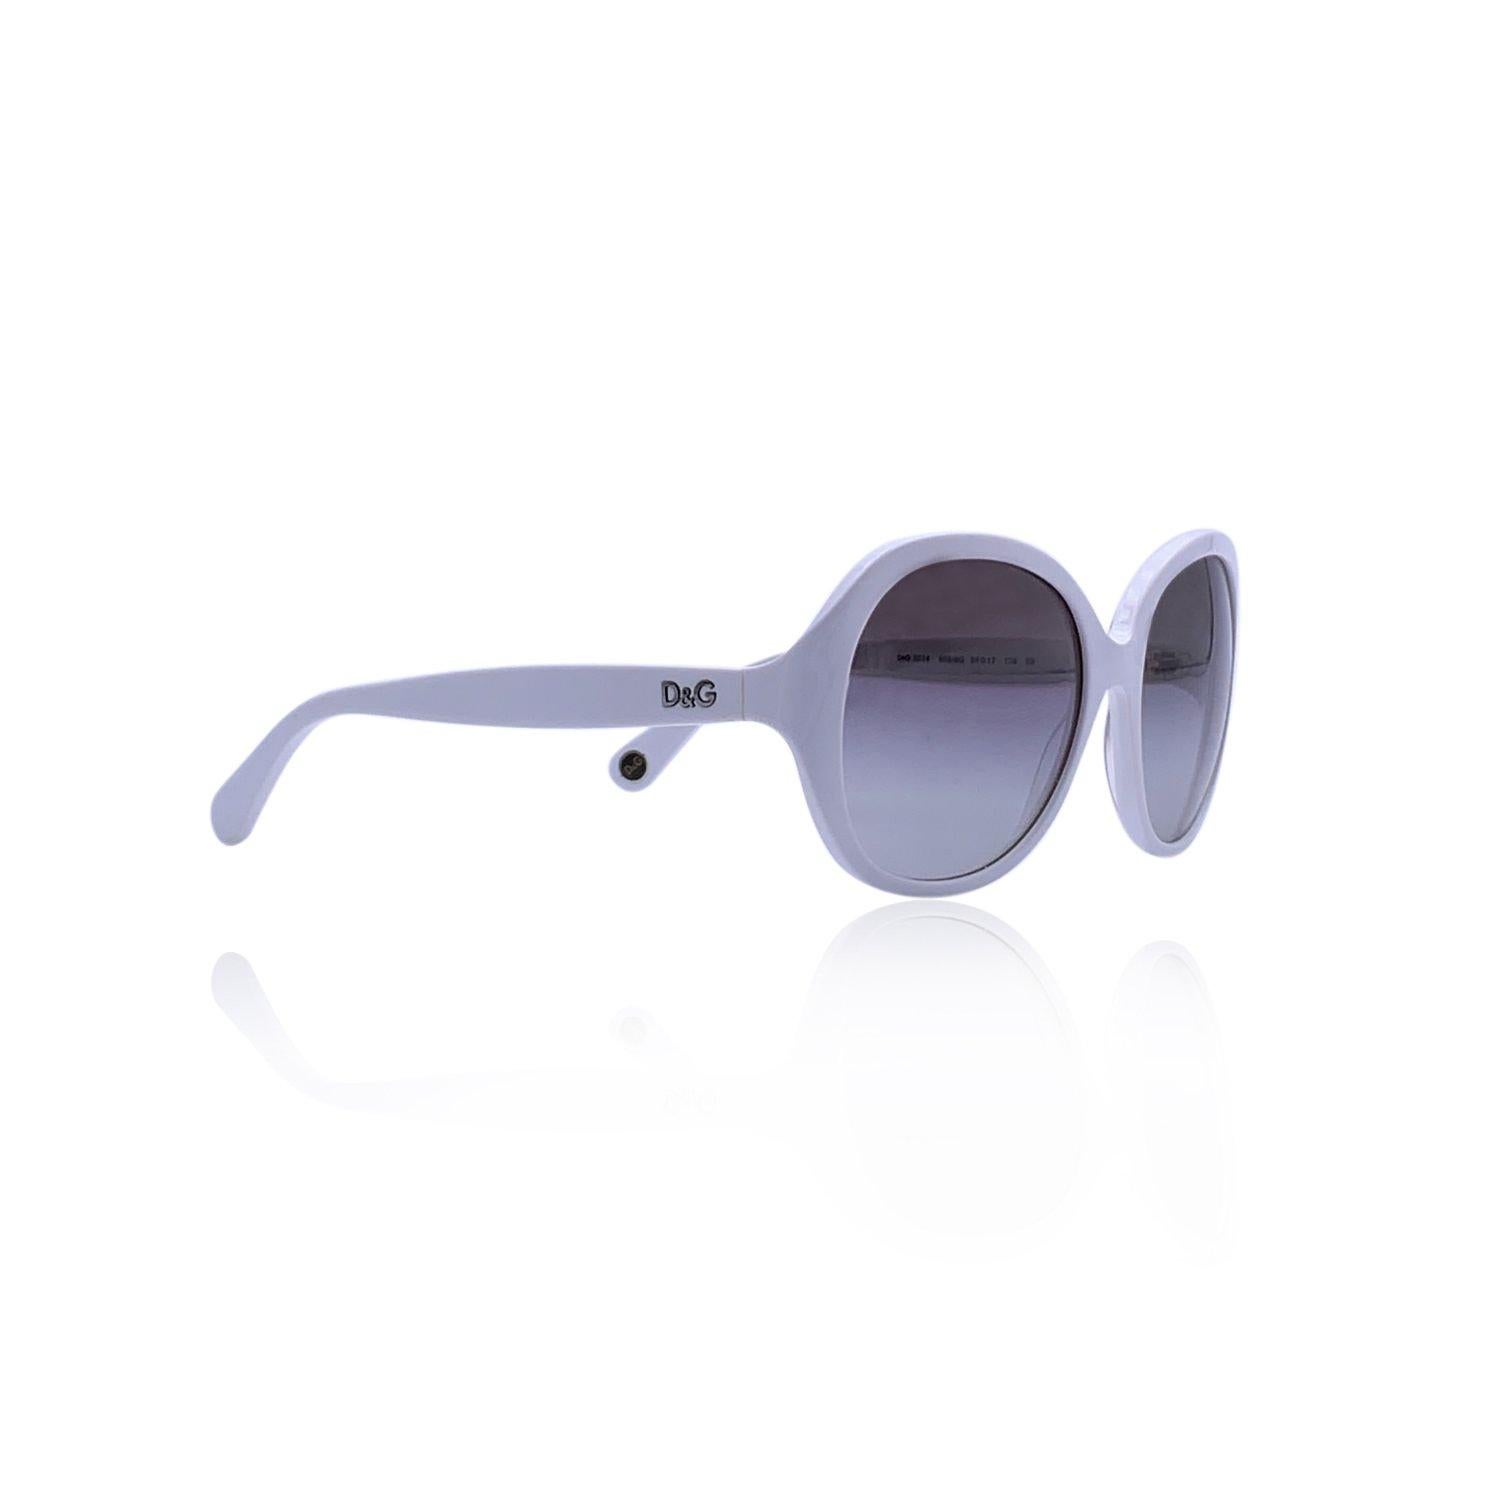 D&G oversized sunglasses mod. 3034 - c.508/8G. They feature a white oversized acetate frame. D&G logo on the arms. Gradient grey lenses. Mod & refs.: mod. 3034 - c.508/8G - 57/17 - 135 3N. Made in Italy Details MATERIAL: Acetate COLOR: White MODEL: